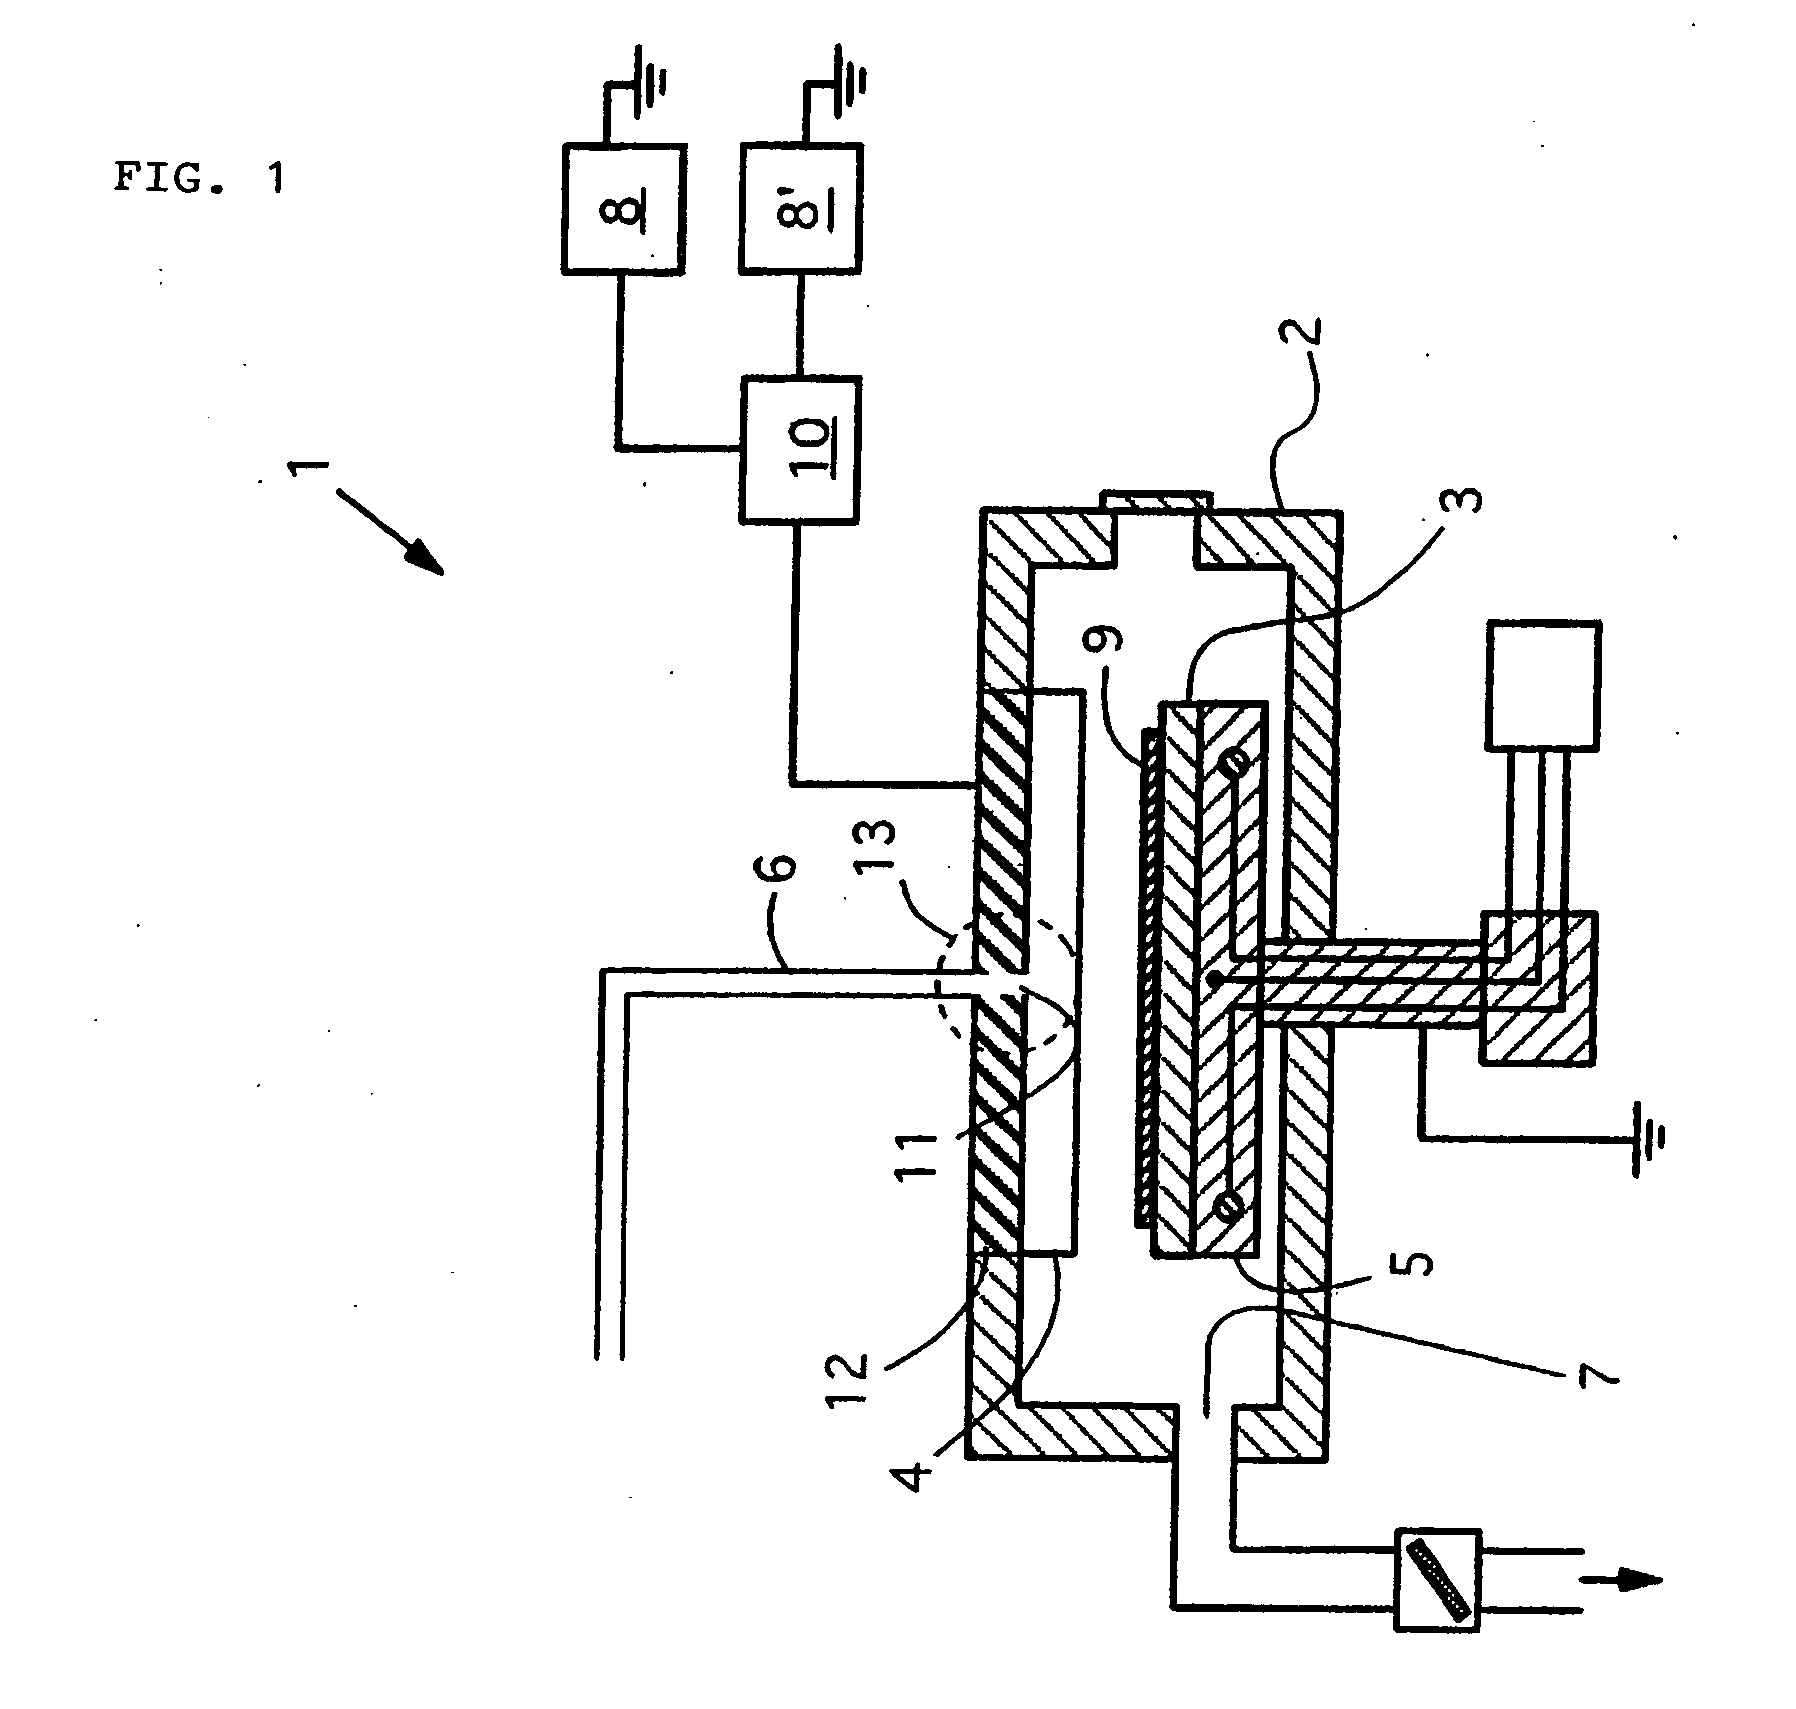 Plasma processing apparatus with insulated gas inlet pore